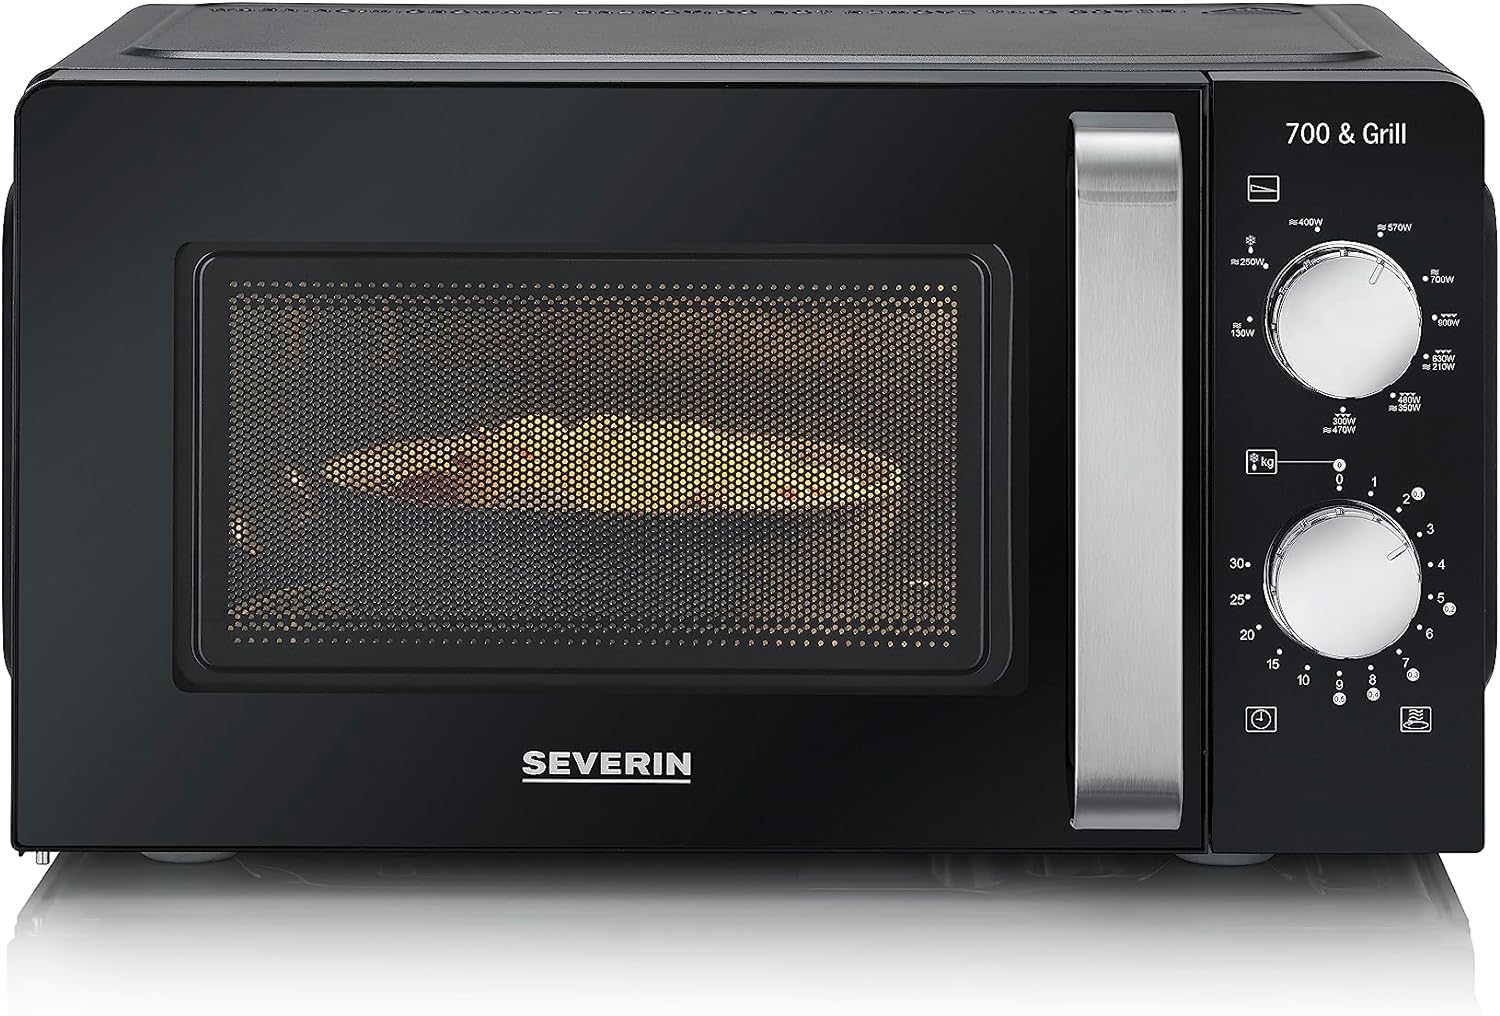 SEVERIN MW 7781 2-in-1 Microwave with Grill 700 W, 900 W Grill, Grill Oven with 9 Automatic Programmes, Microwave with Cooking Grate and Turntable, Black/Stainless Steel